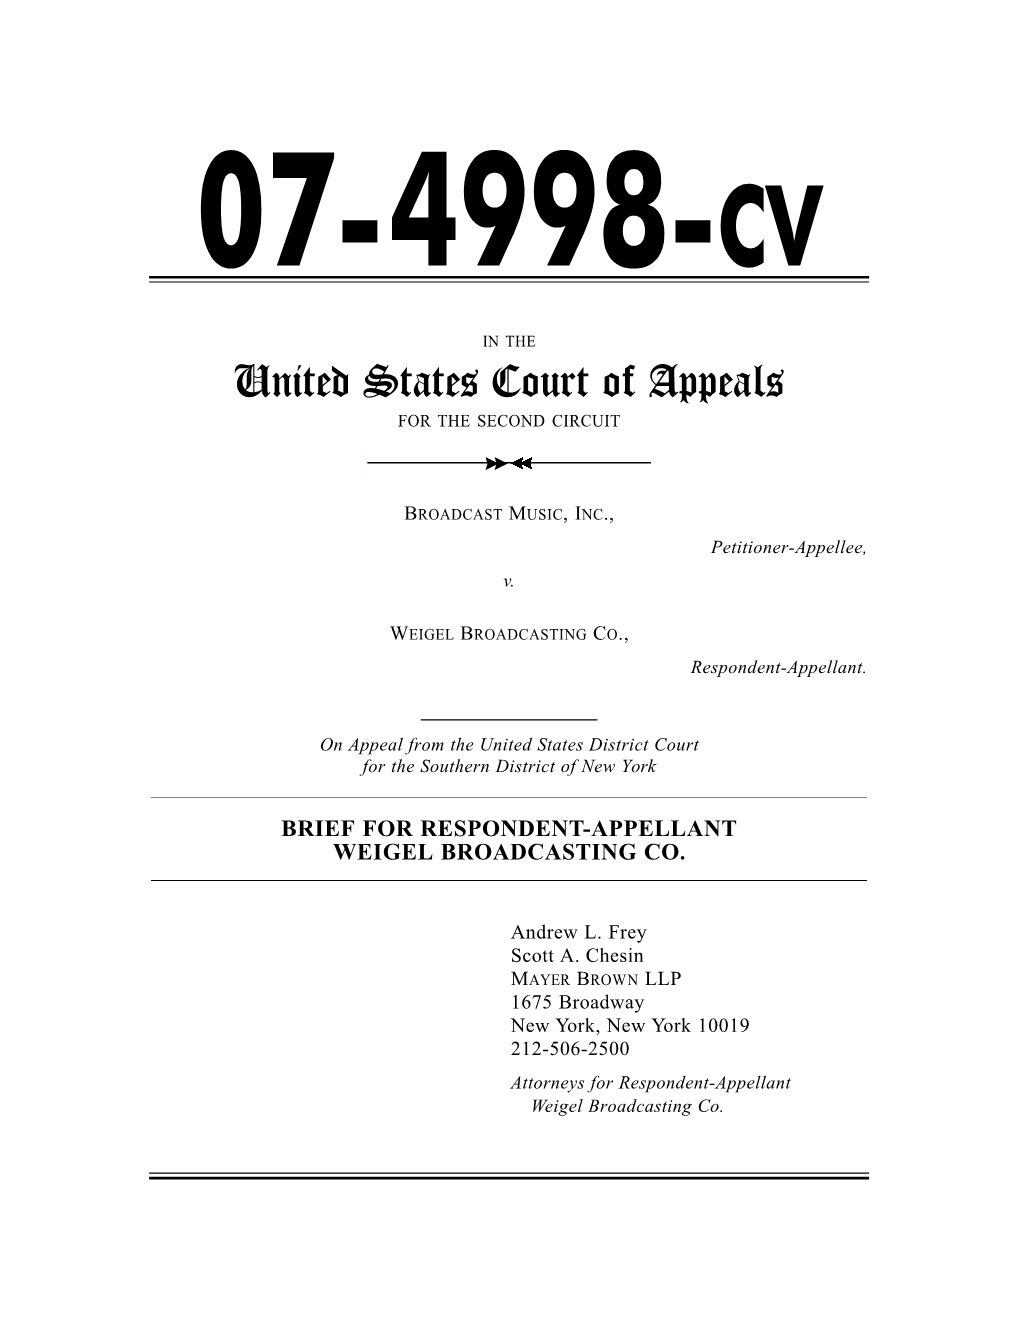 United States Court of Appeals for the SECOND CIRCUIT >>